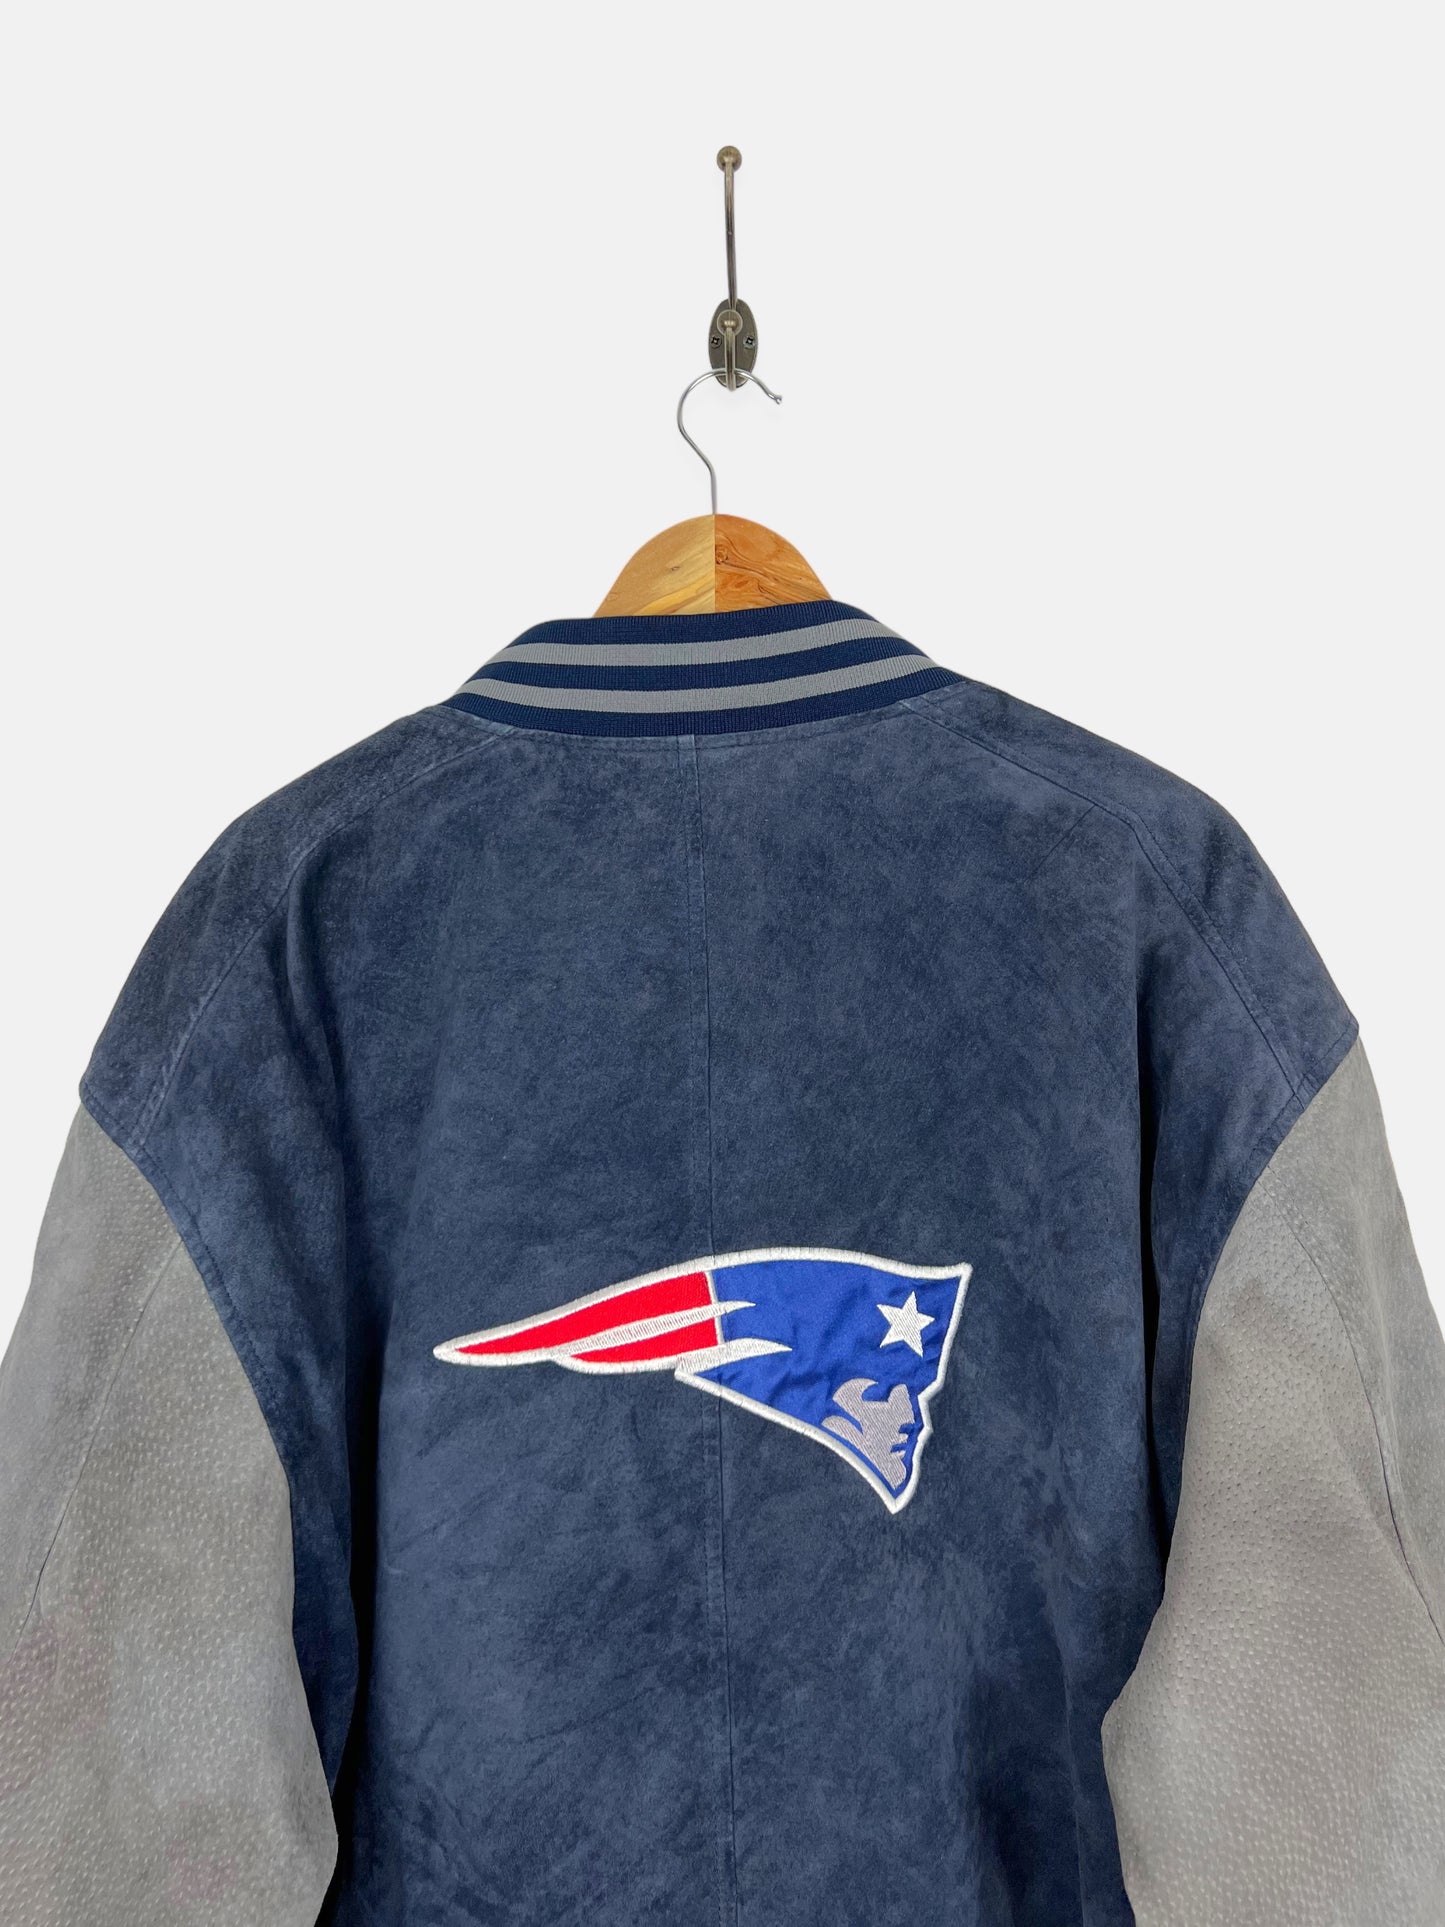 90's New England Patriots NFL Embroidered Vintage Suede Jacket Size XL-2XL